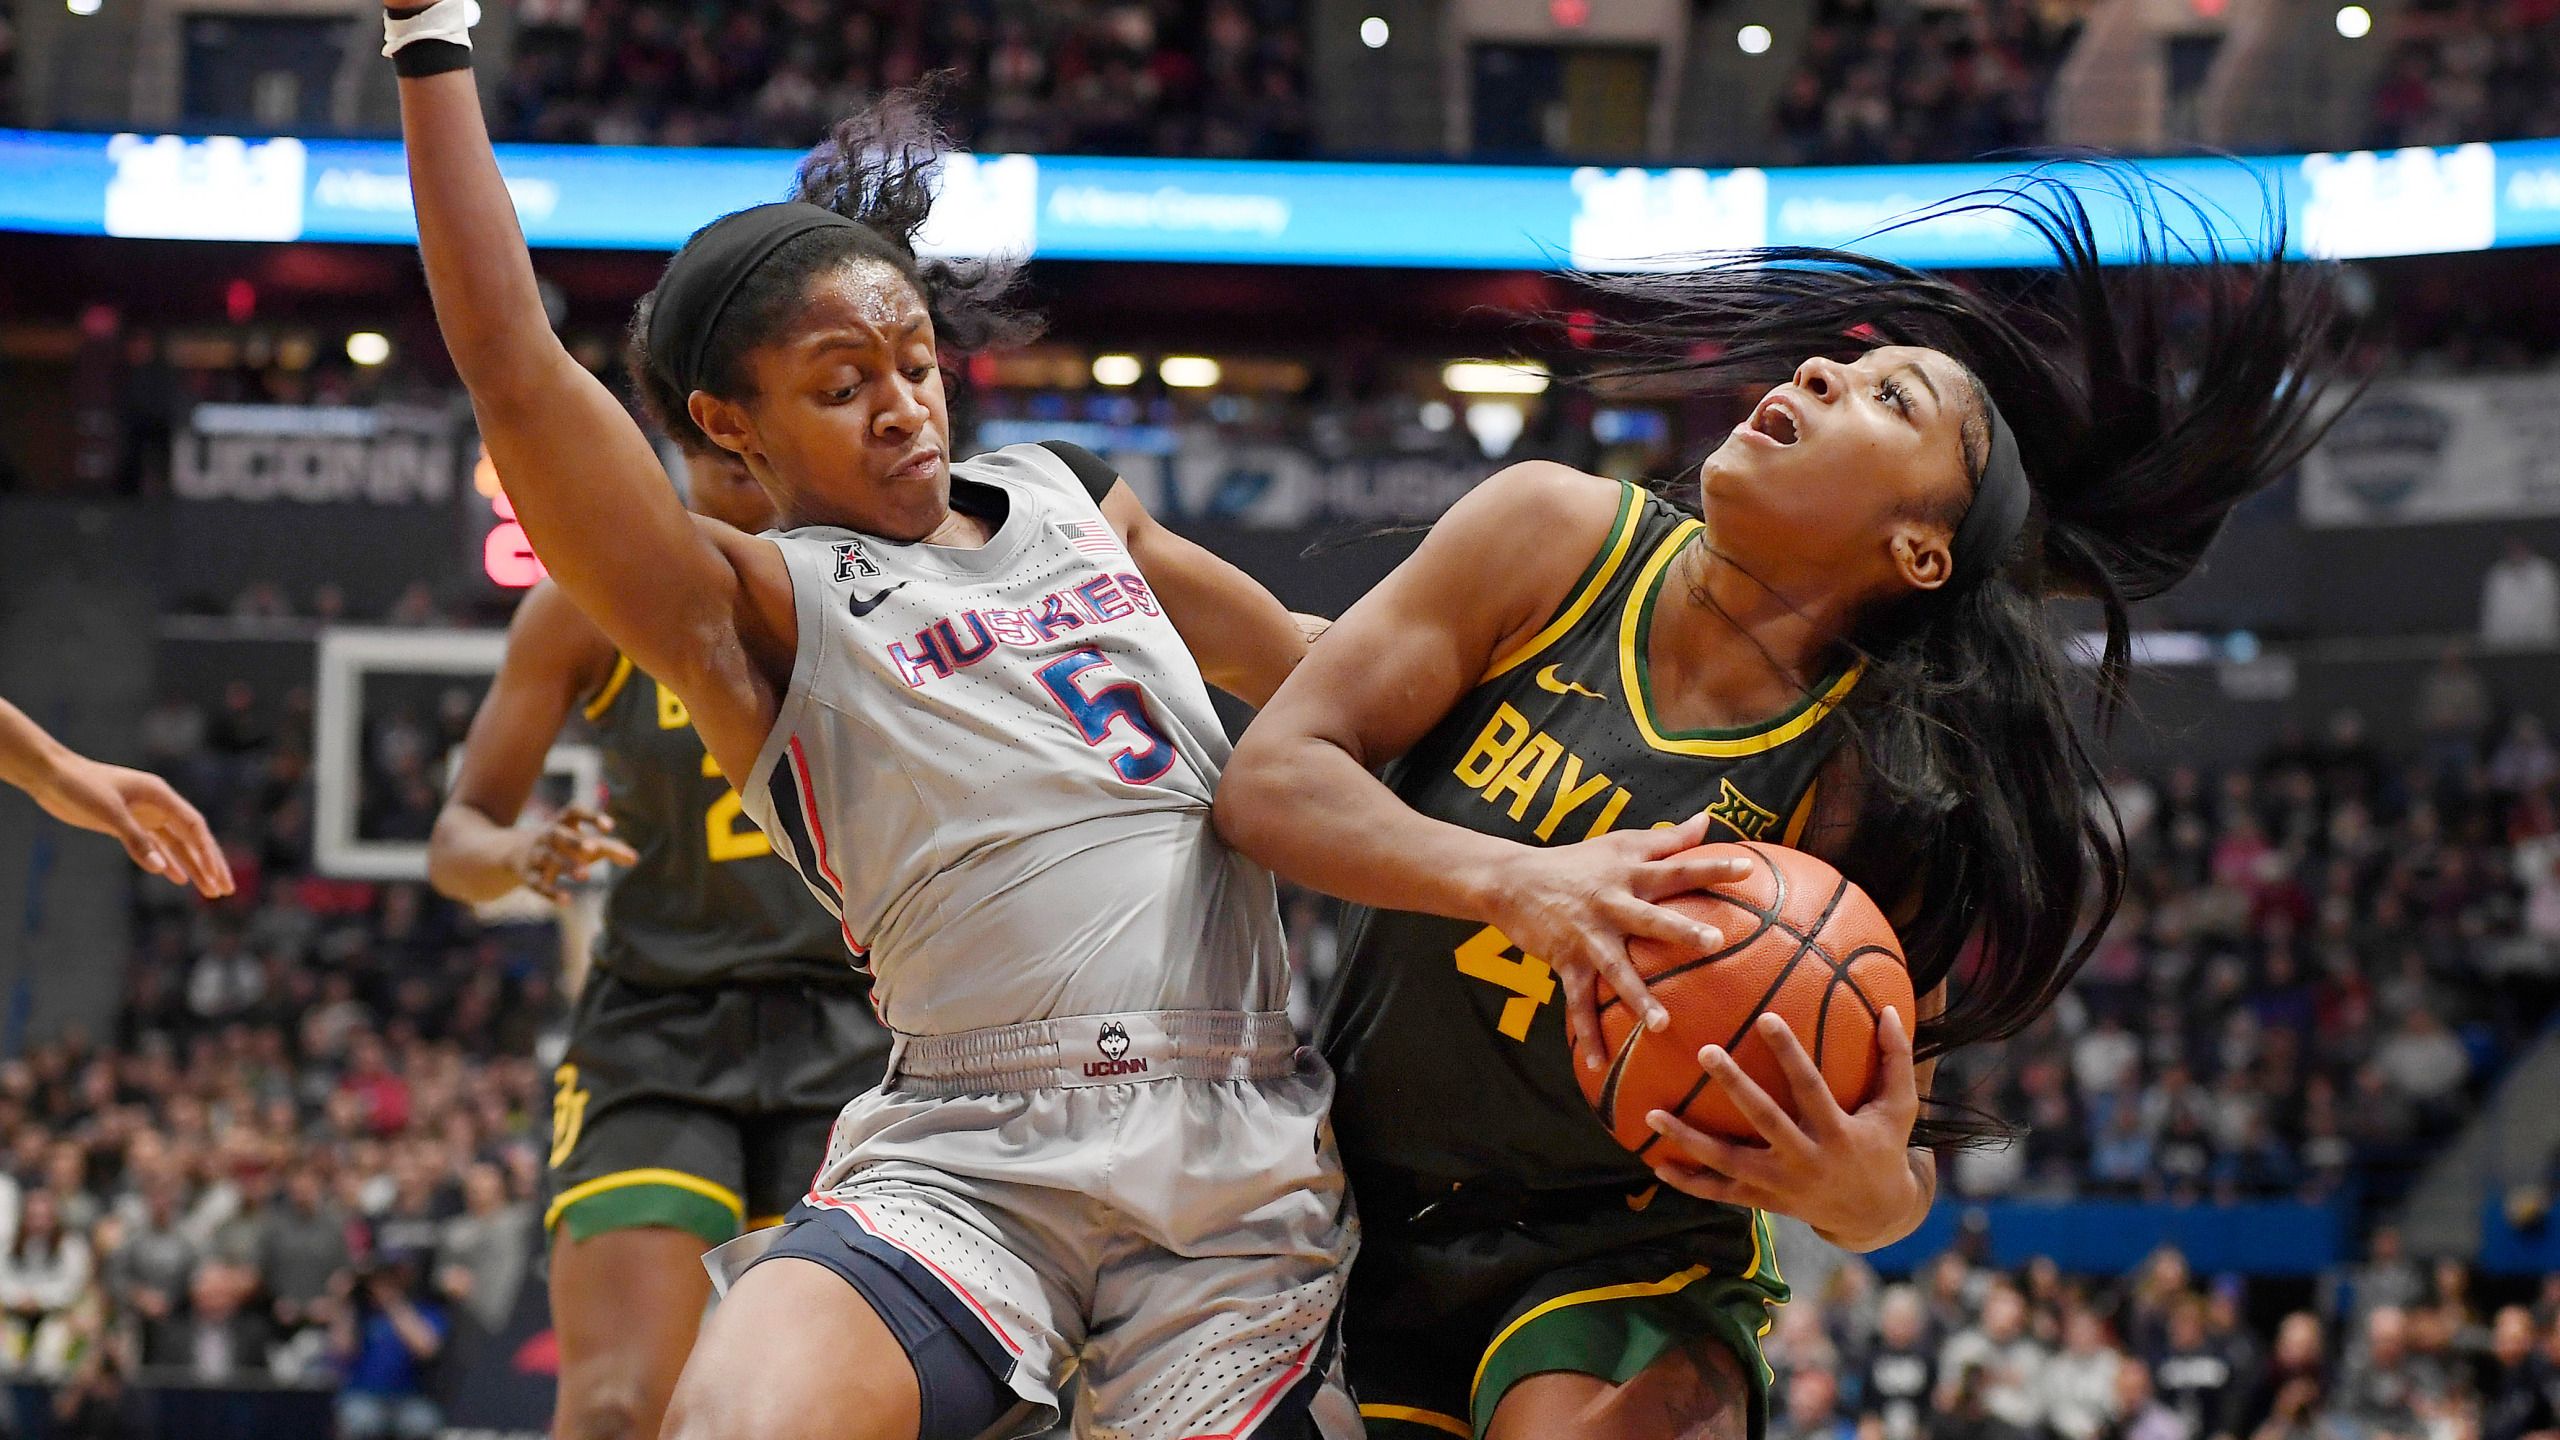 98 Game Home Win Streak Over For UConn Women's Basketball After Lost To Baylor